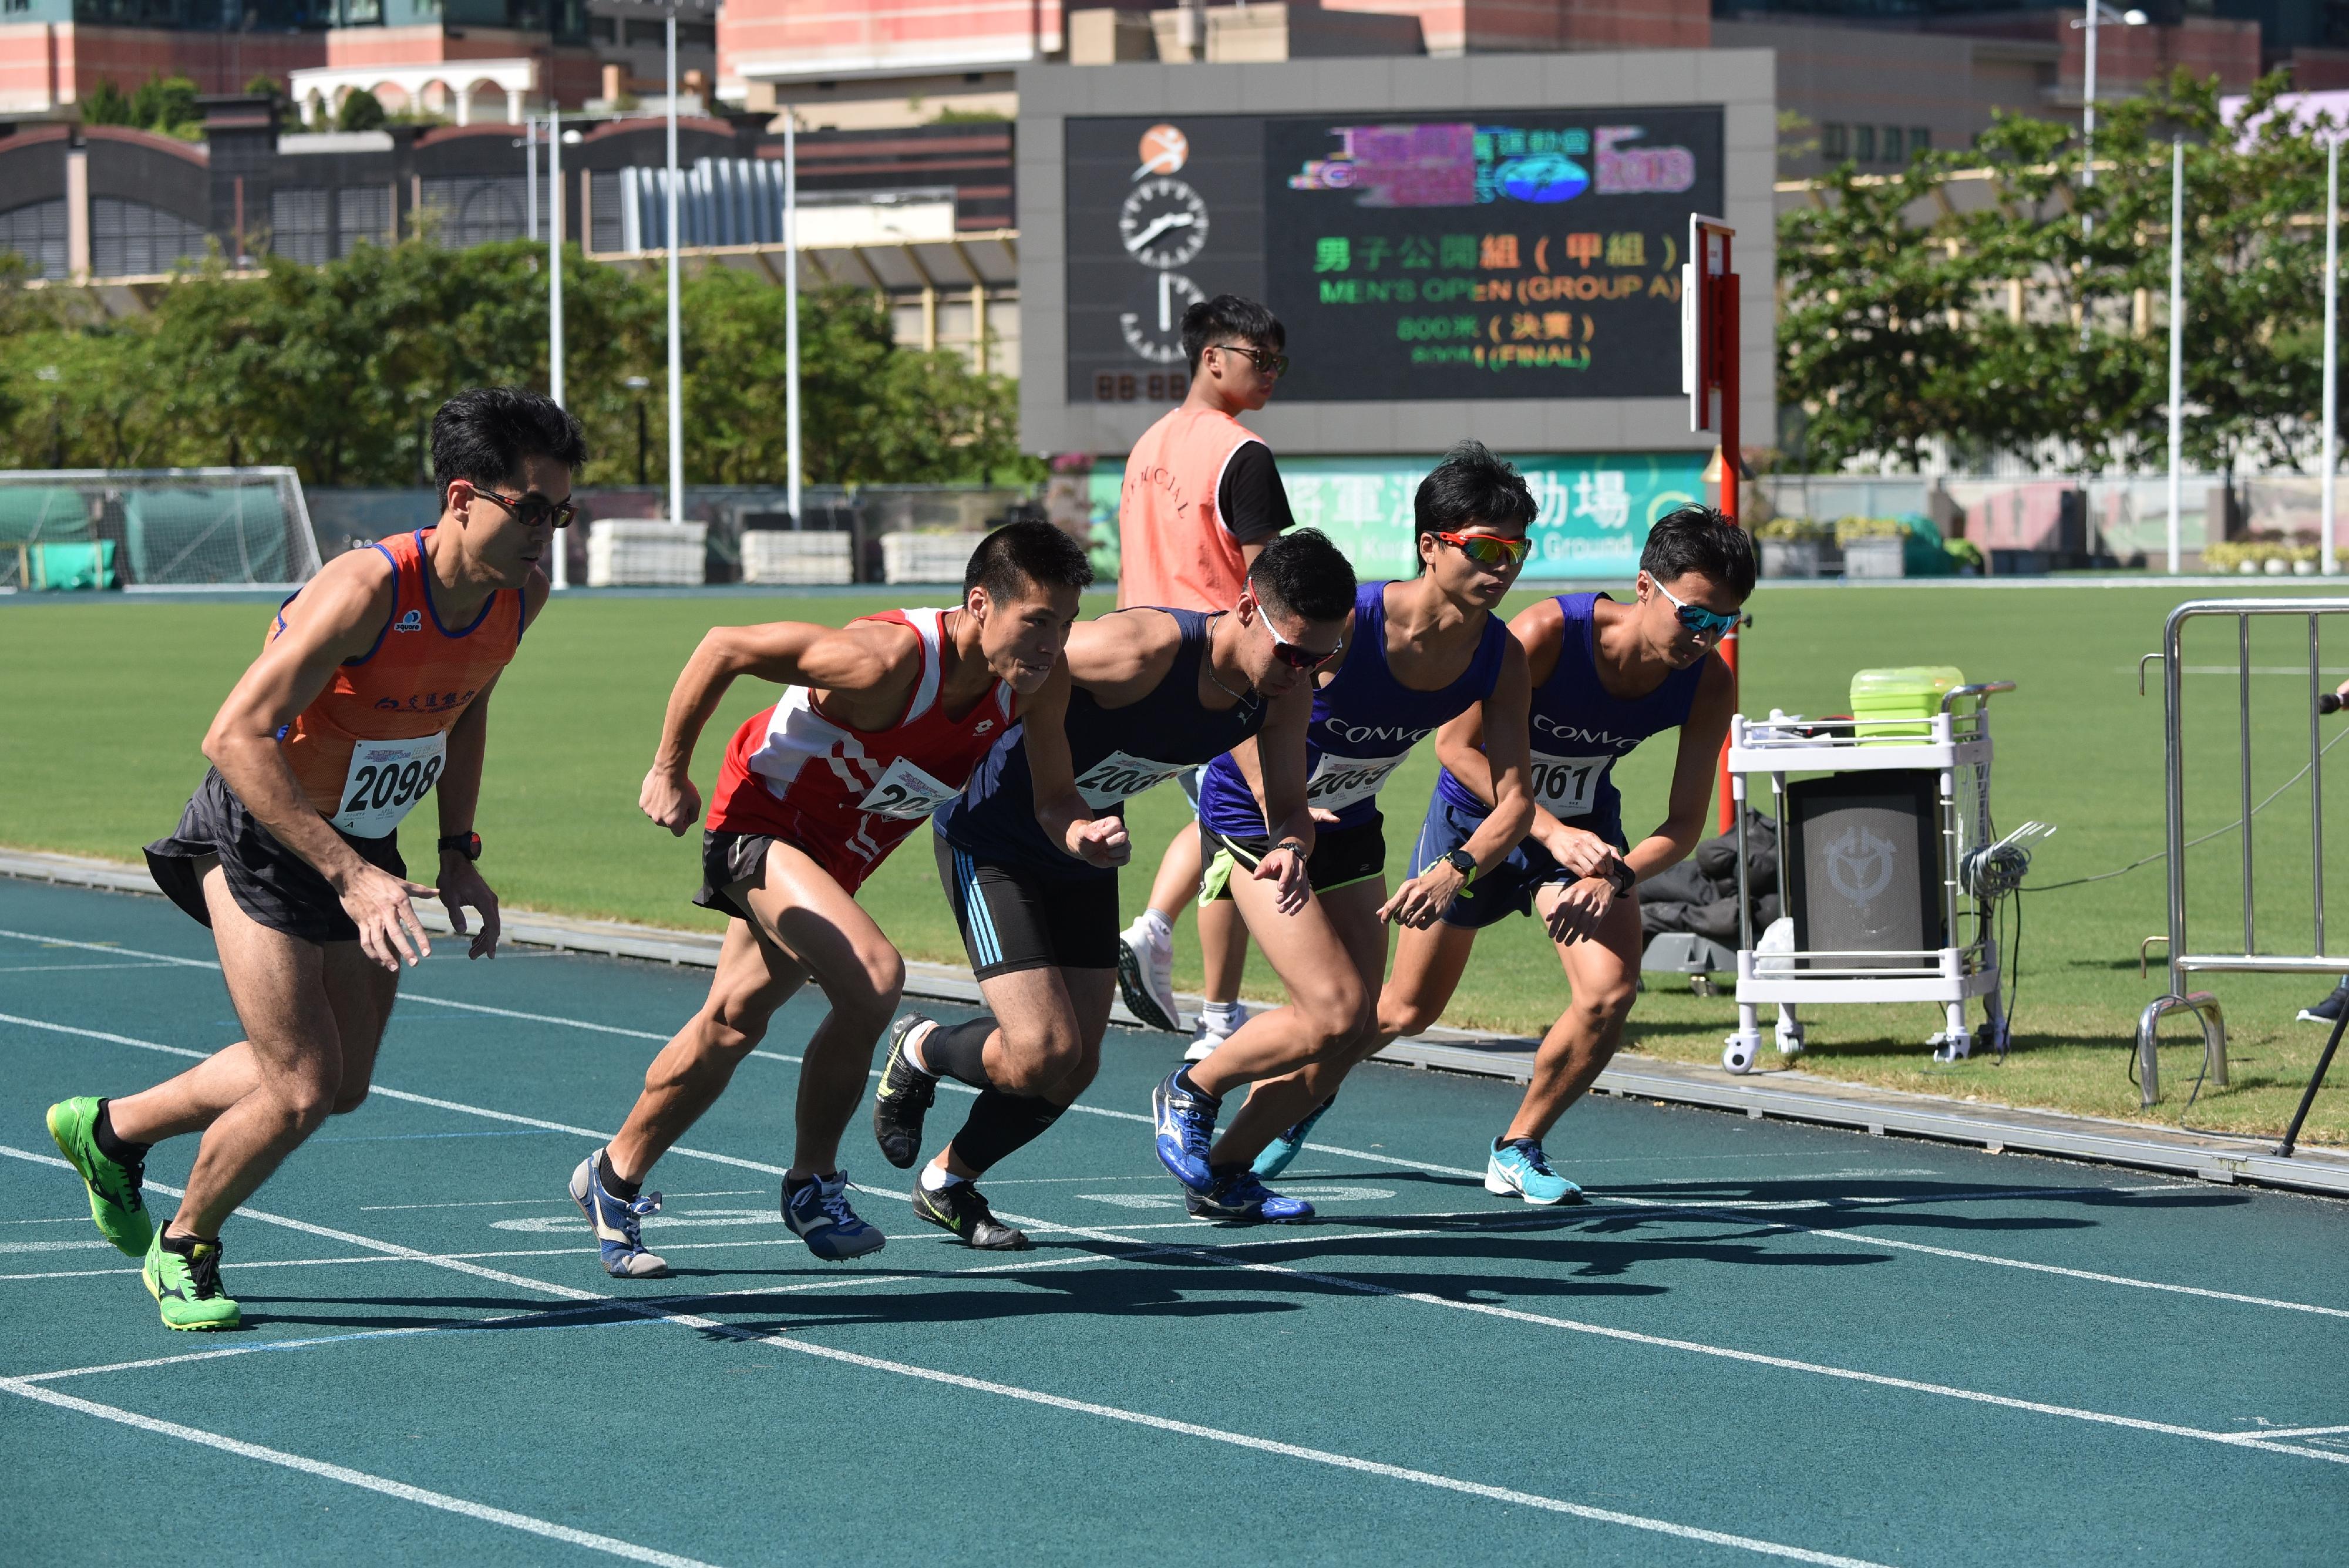 The Corporate Games 2023, organised by the Leisure and Cultural Services Department, will open for enrolment from October 17. Employees of commercial and industrial organisations and the public sector are welcome to take part in the Games. Photo shows athletes participating in an athletics competition at the Corporate Games 2018.